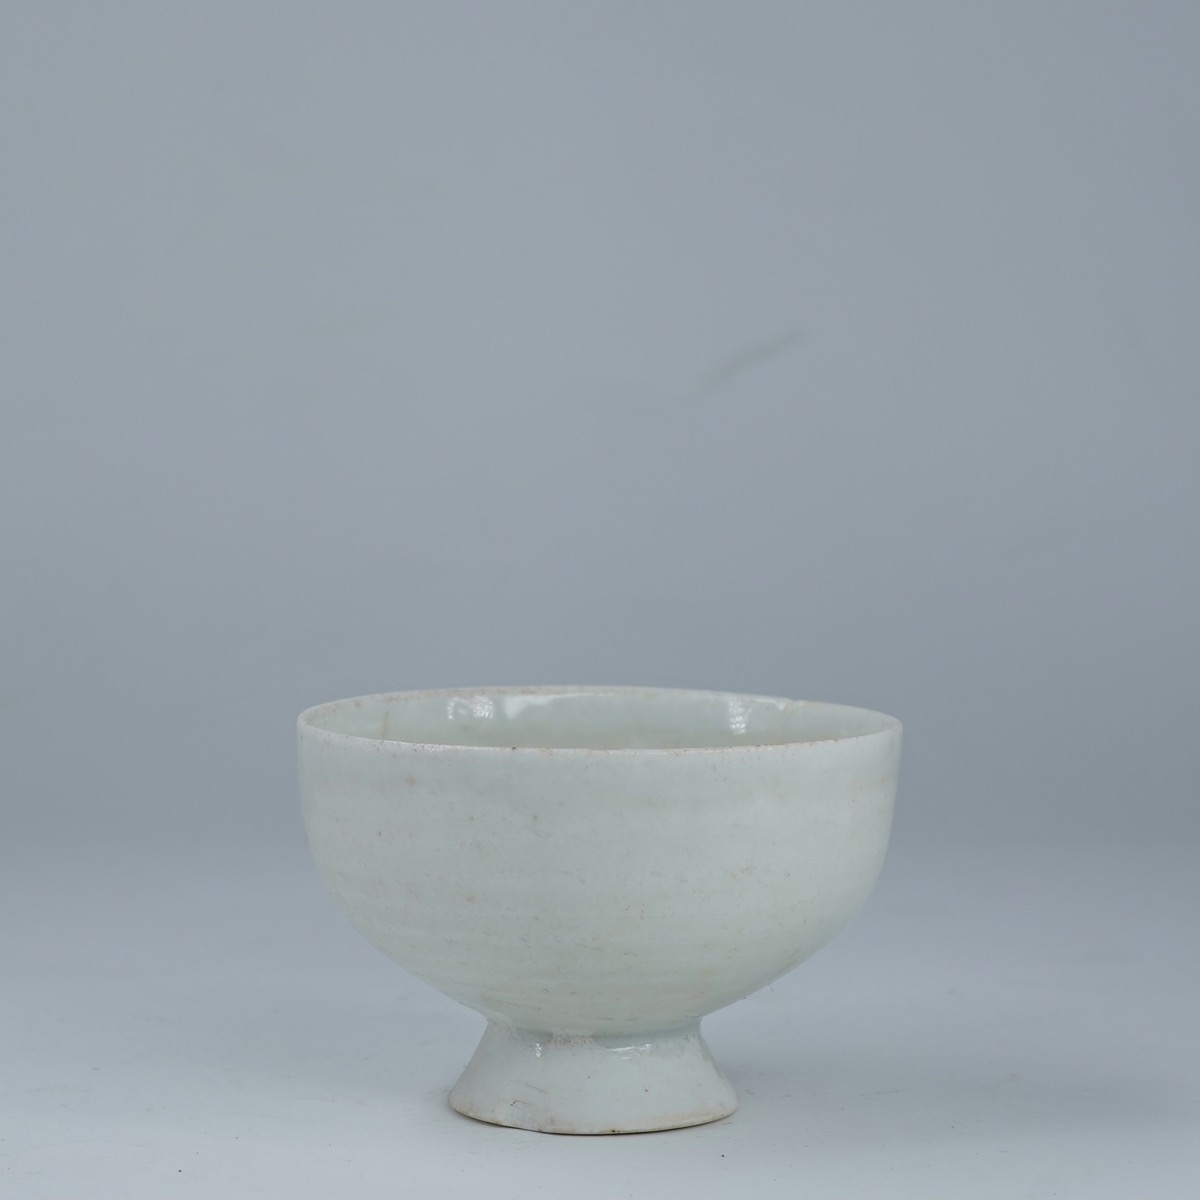 Chinese white glazed stem cup, Song Dynasty